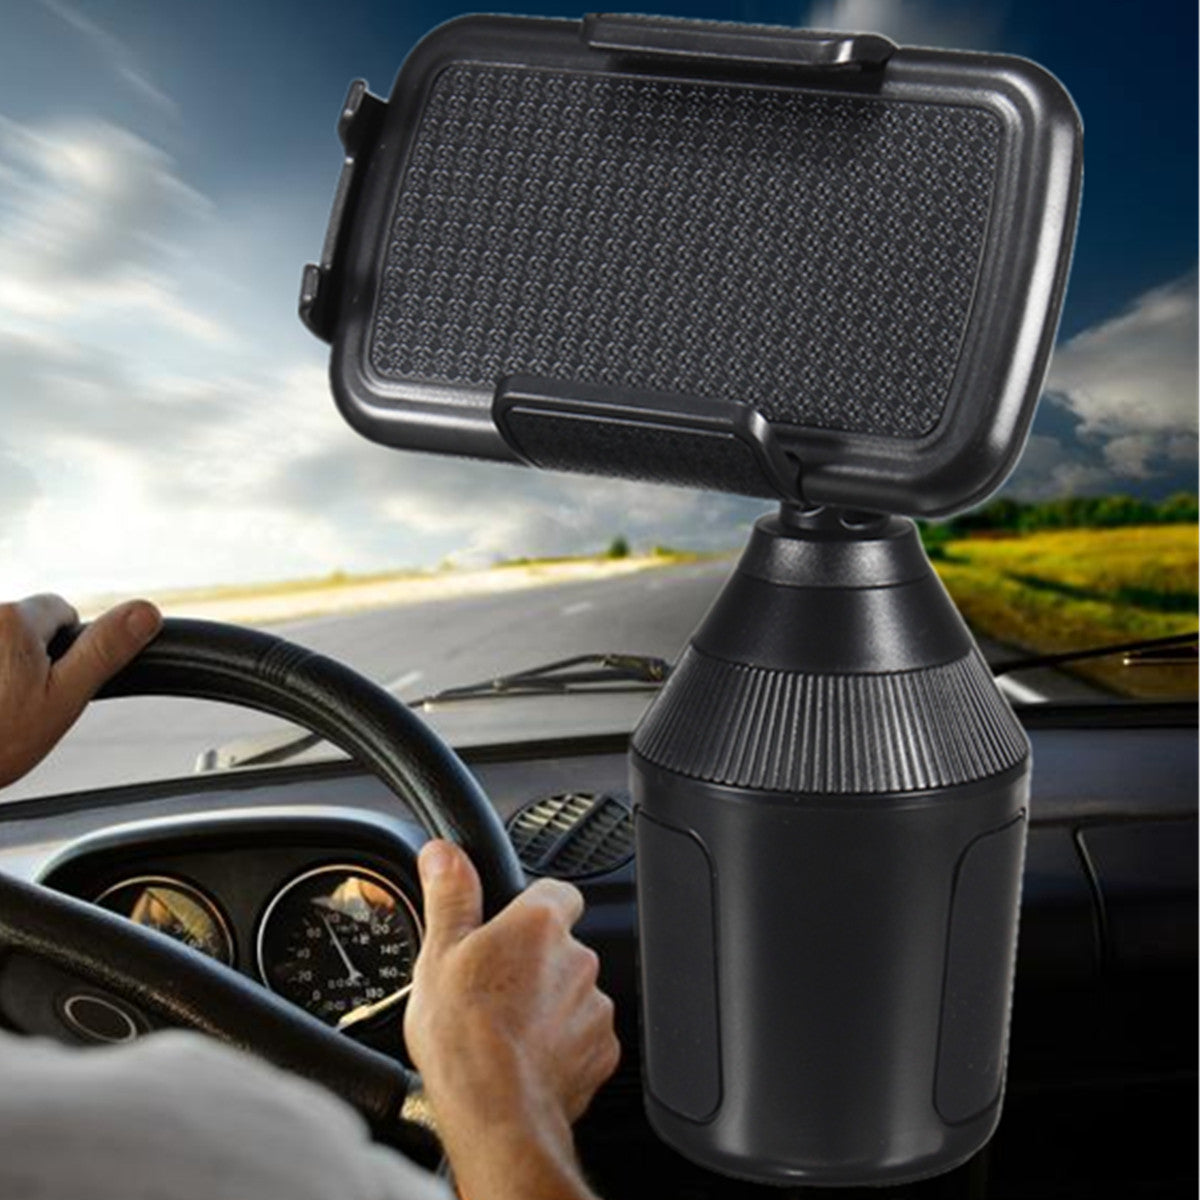 Dark Slate Gray Car Cup Mobile Phone Holder 360° Adjustable Mount Clip for iPhone Xs Xs Max XR